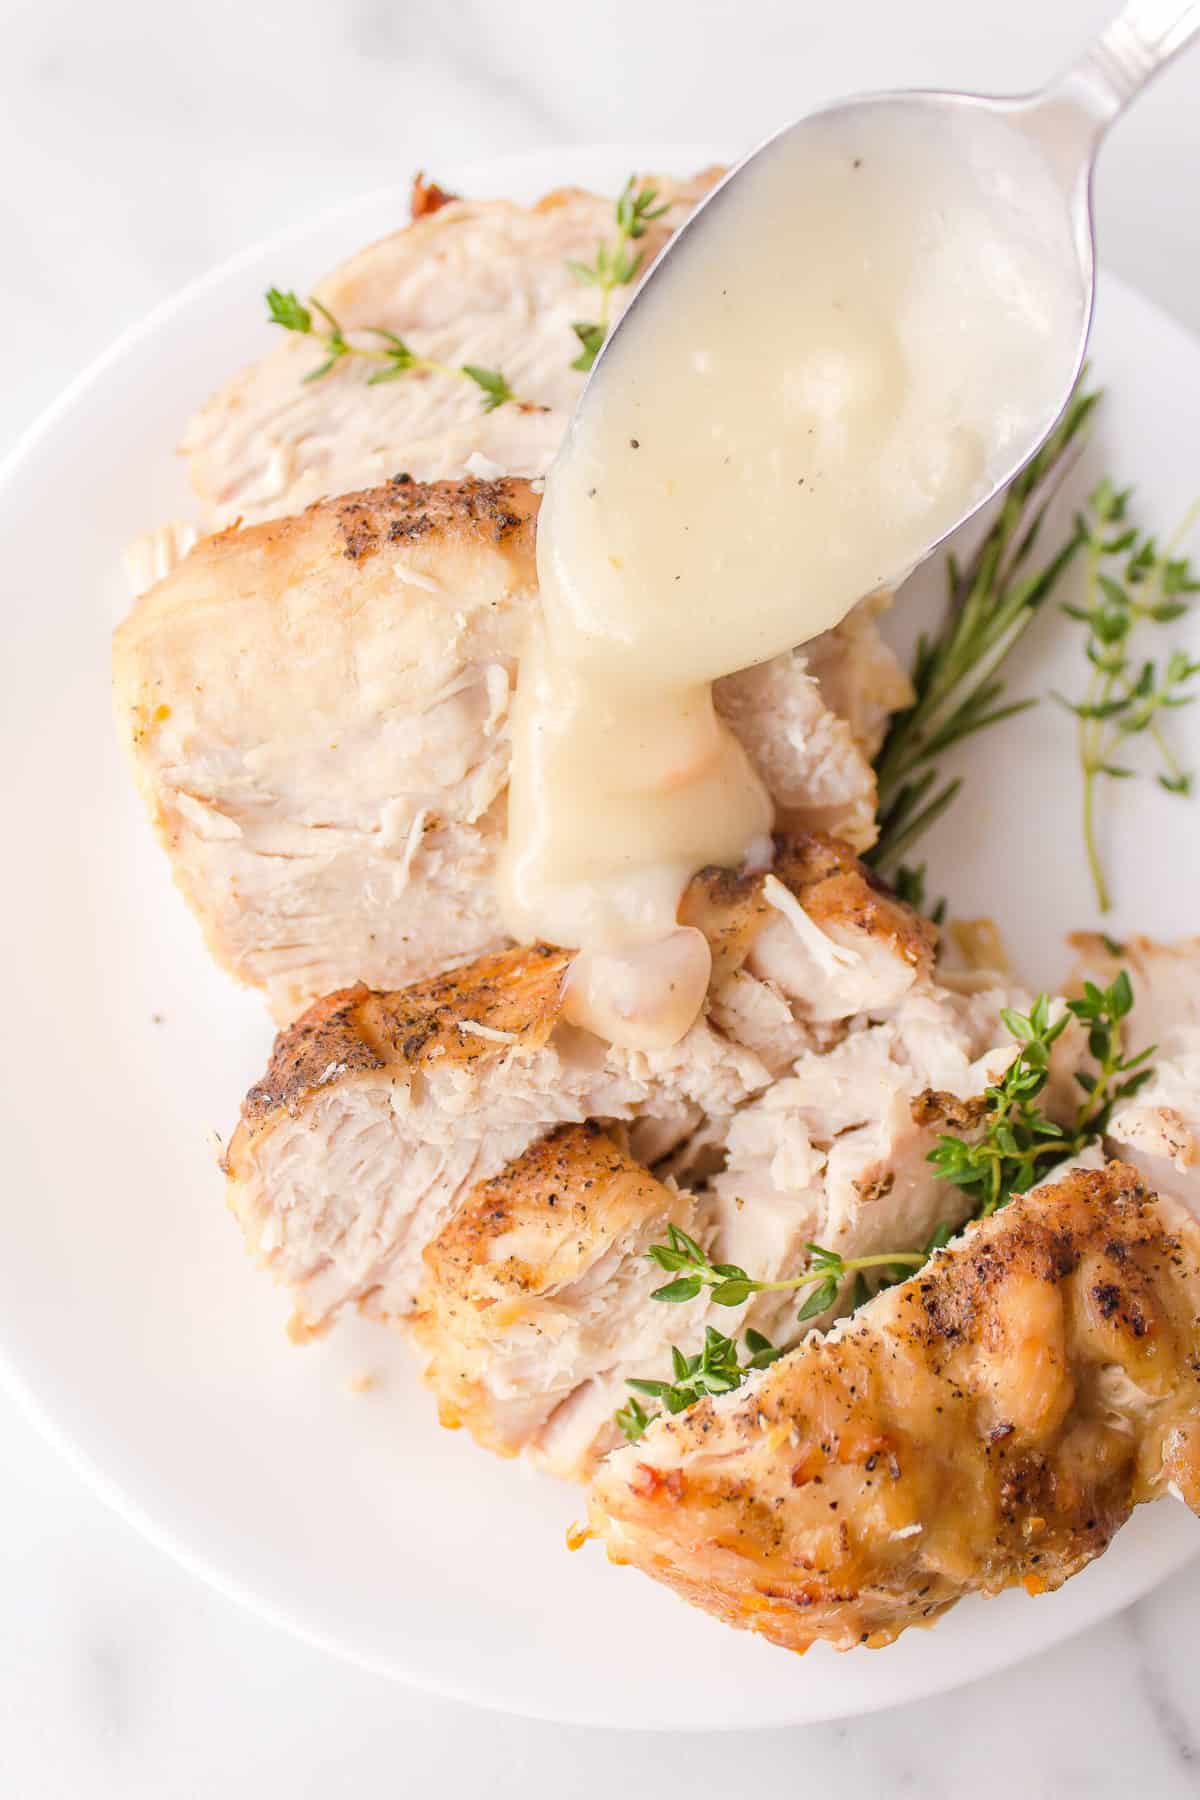 slice turkey breast made from a slow cooker served on a white plate with homemade gravy and rosemary